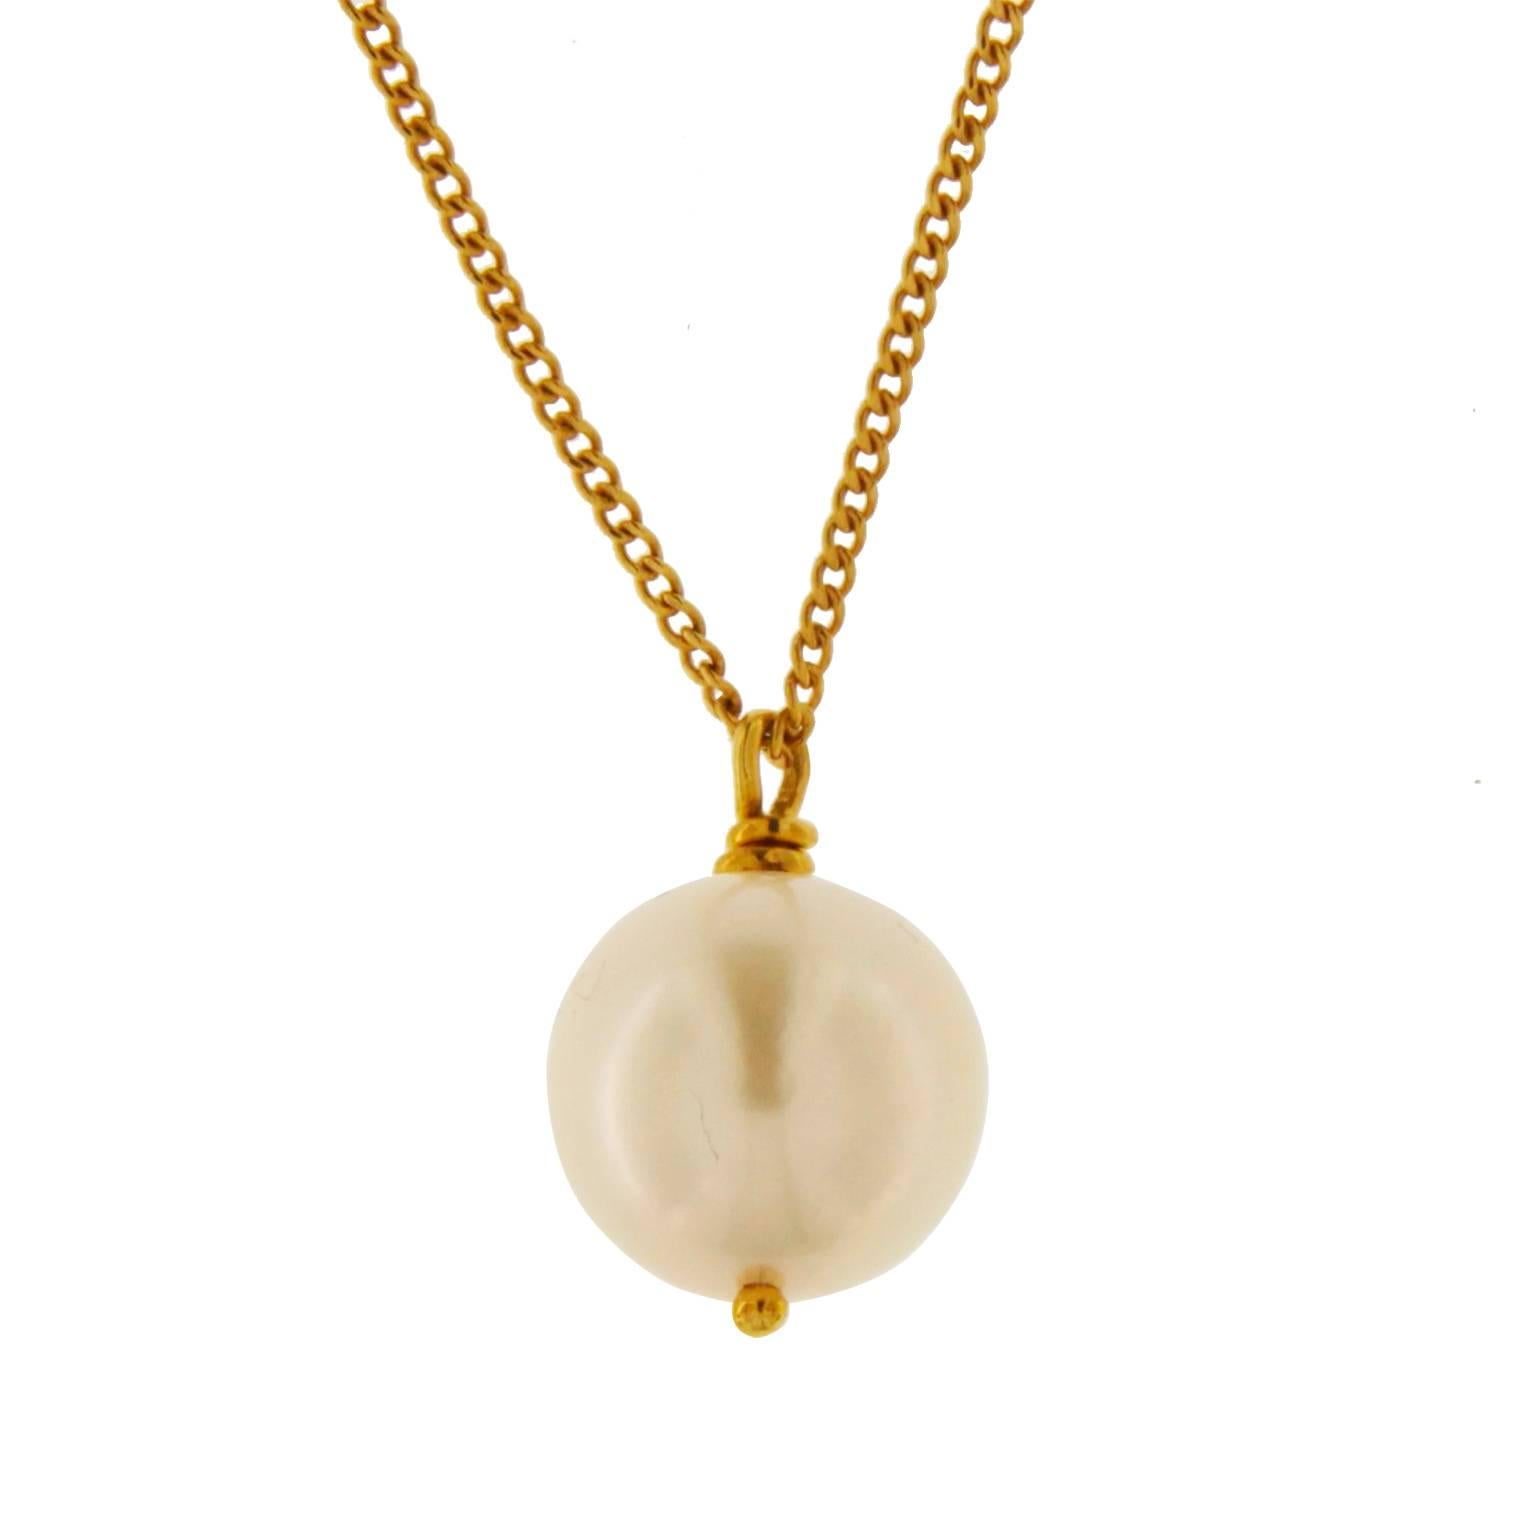 This Valentin Magro Necklace features a smooth 9mm fresh water pearl hanging from a 17 inch long chain.  Finished in 18kt yellow gold.